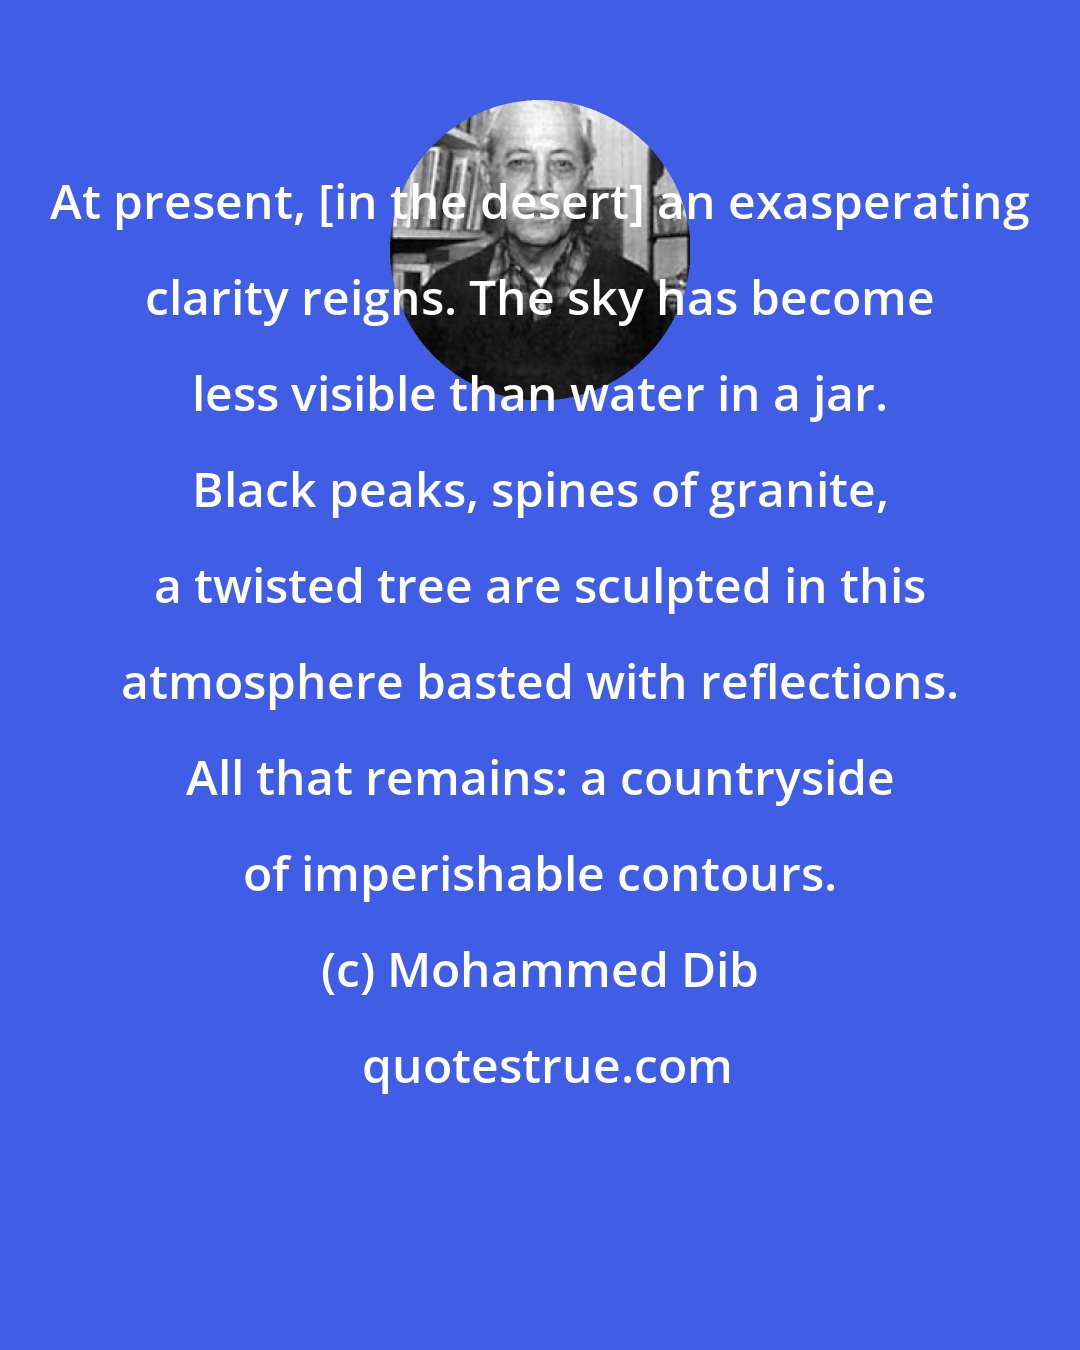 Mohammed Dib: At present, [in the desert] an exasperating clarity reigns. The sky has become less visible than water in a jar. Black peaks, spines of granite, a twisted tree are sculpted in this atmosphere basted with reflections. All that remains: a countryside of imperishable contours.